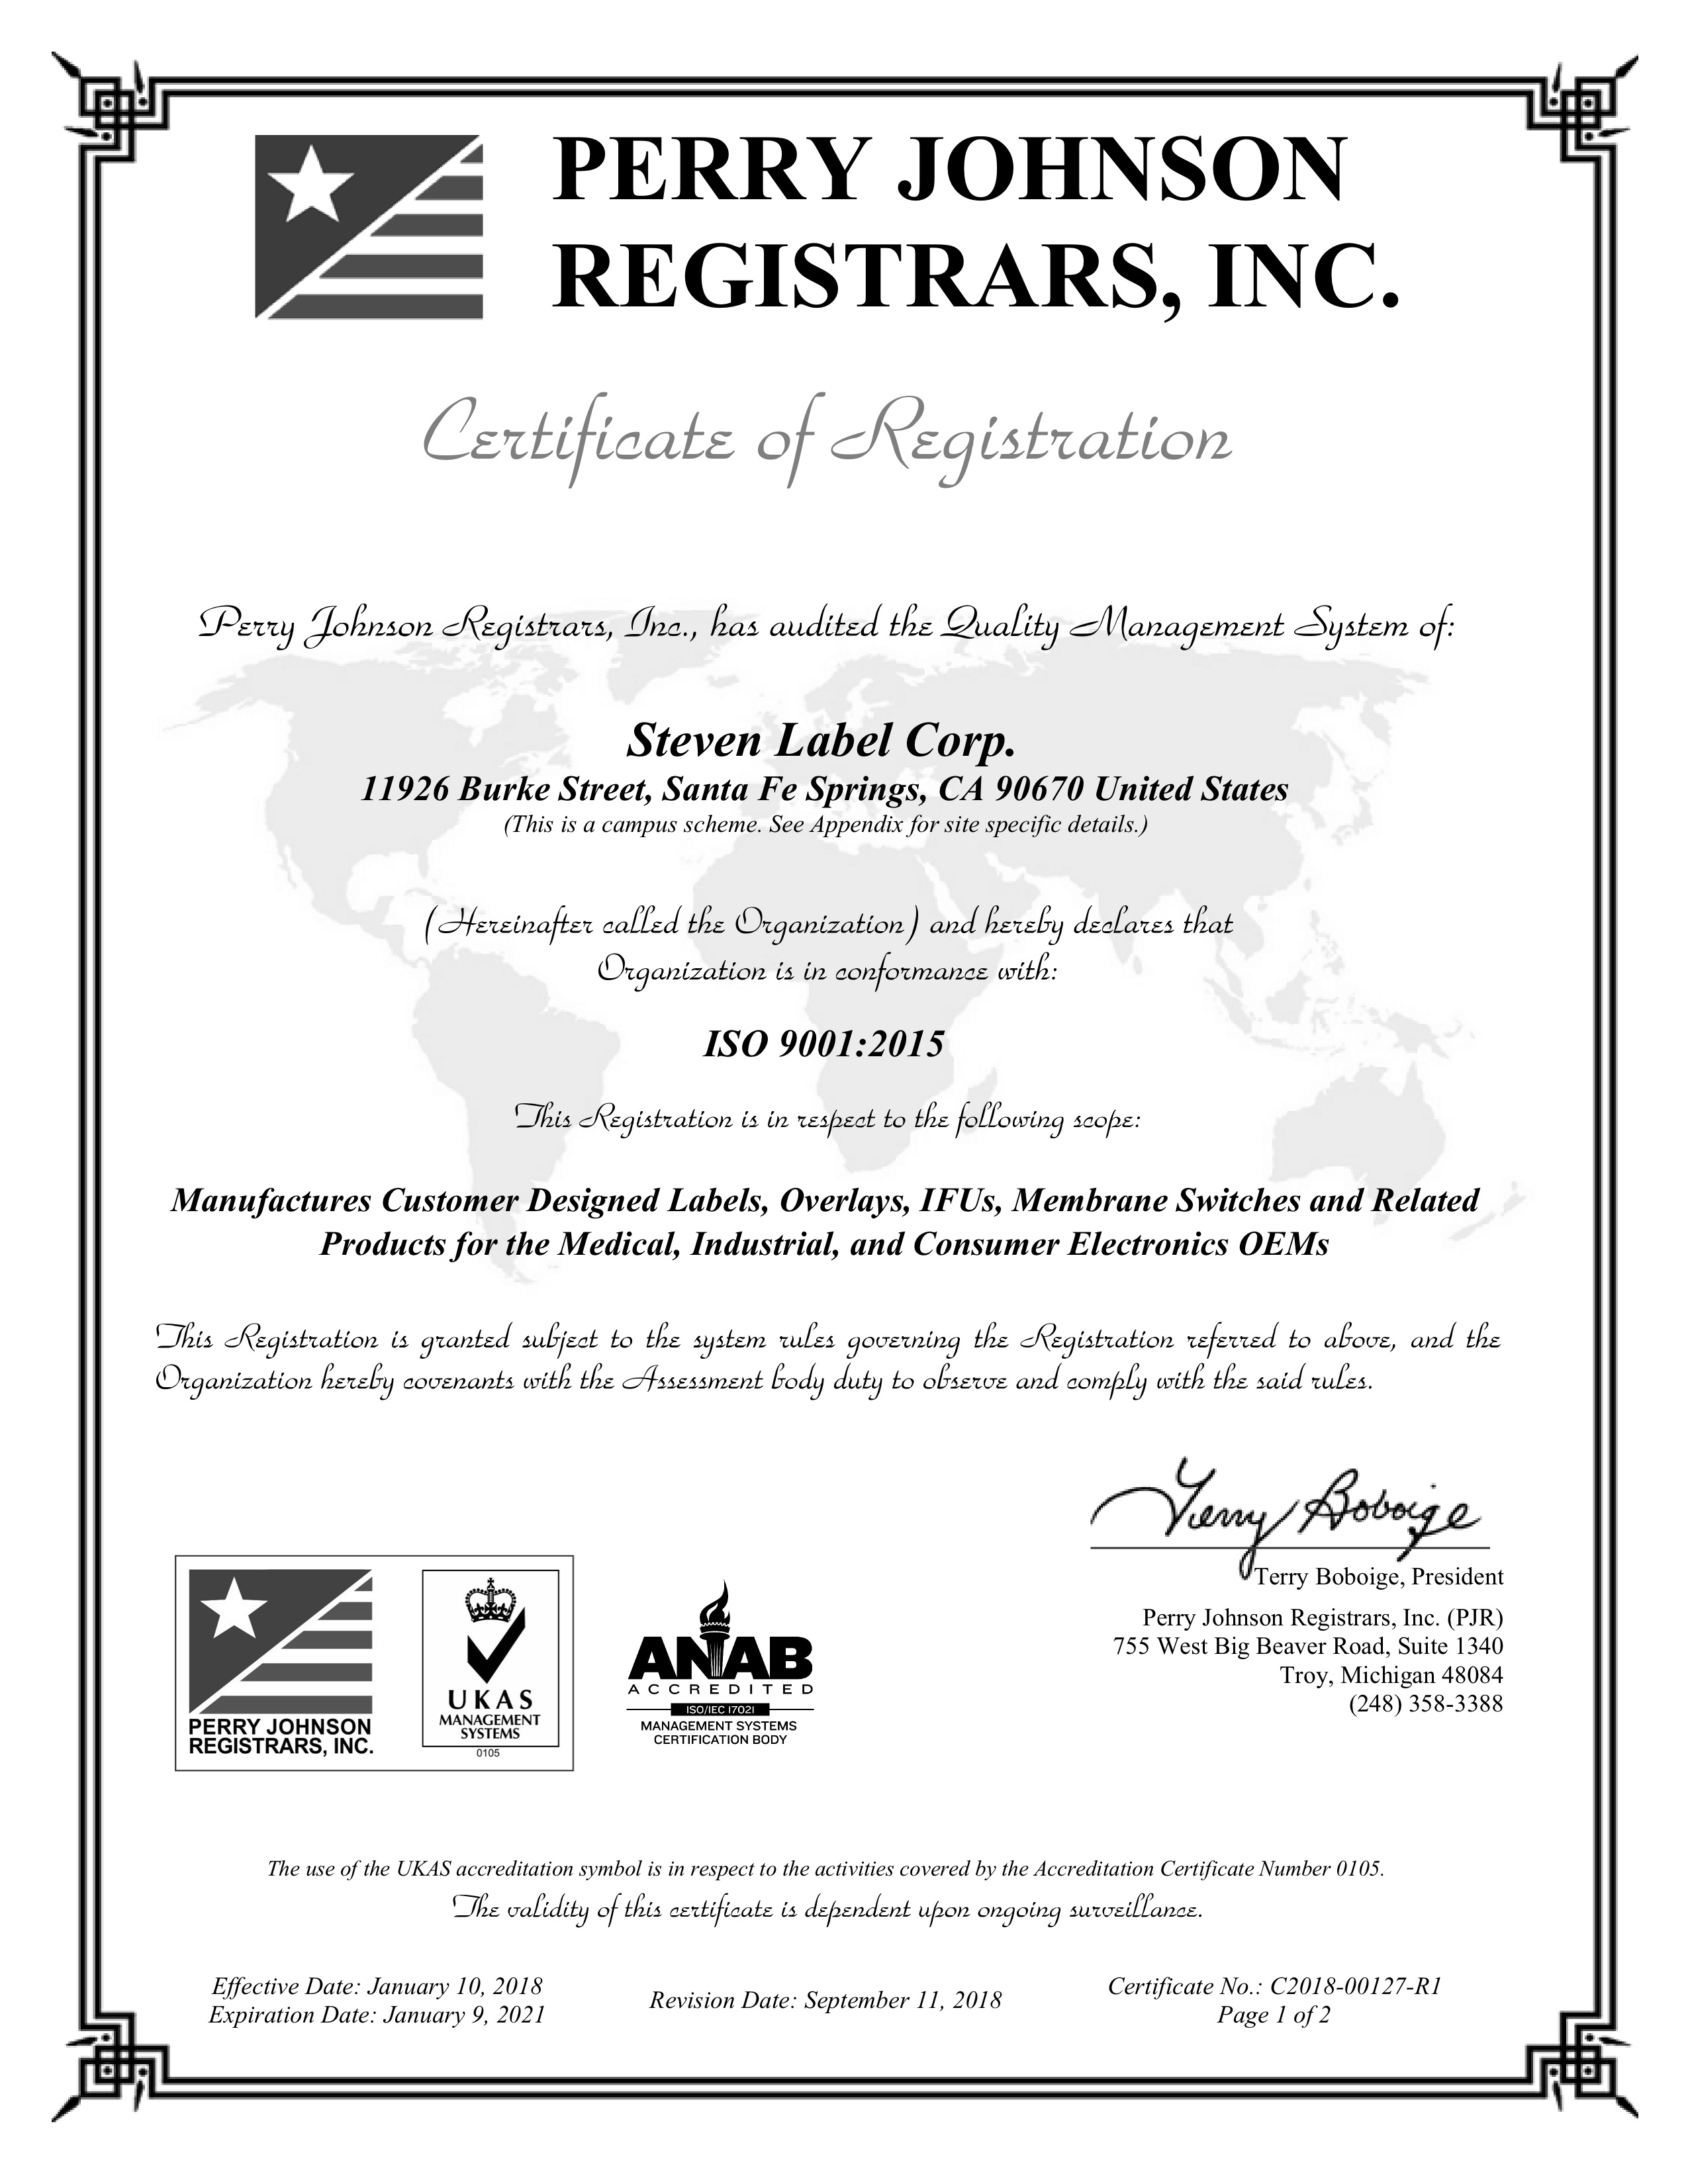 Steven Label achieves ISO 9001:2015 Certification!